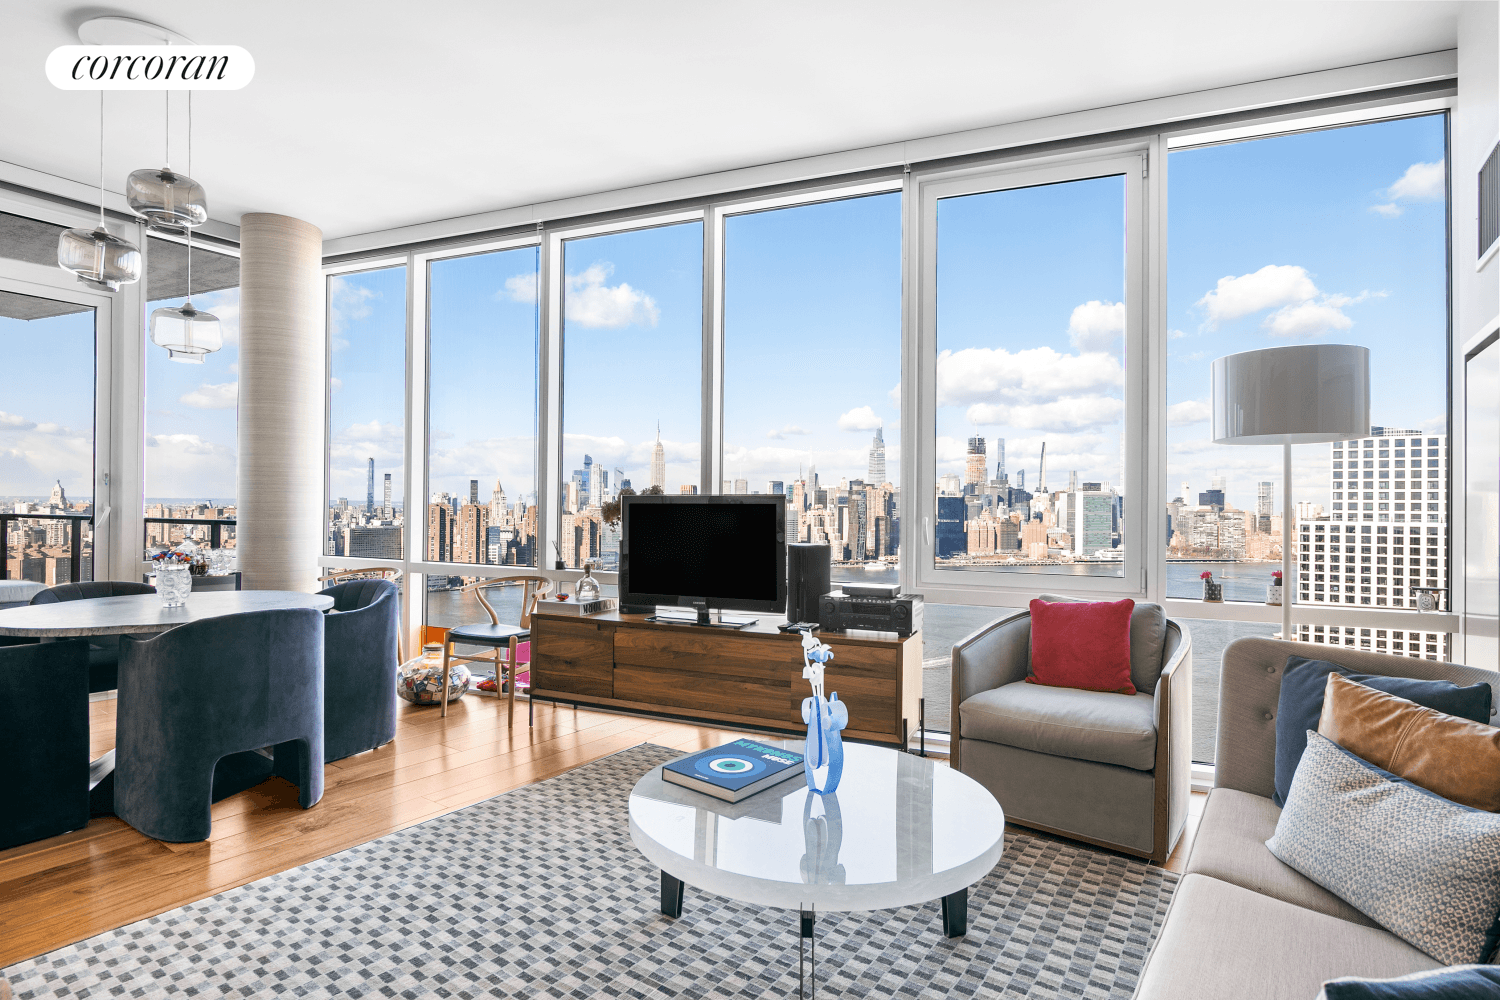 Don't miss this opportunity to own a stunning two bedroom condo located on the 38th floor at the Greenpoint with breathtaking panoramic views of Manhattan's iconic cityscape !